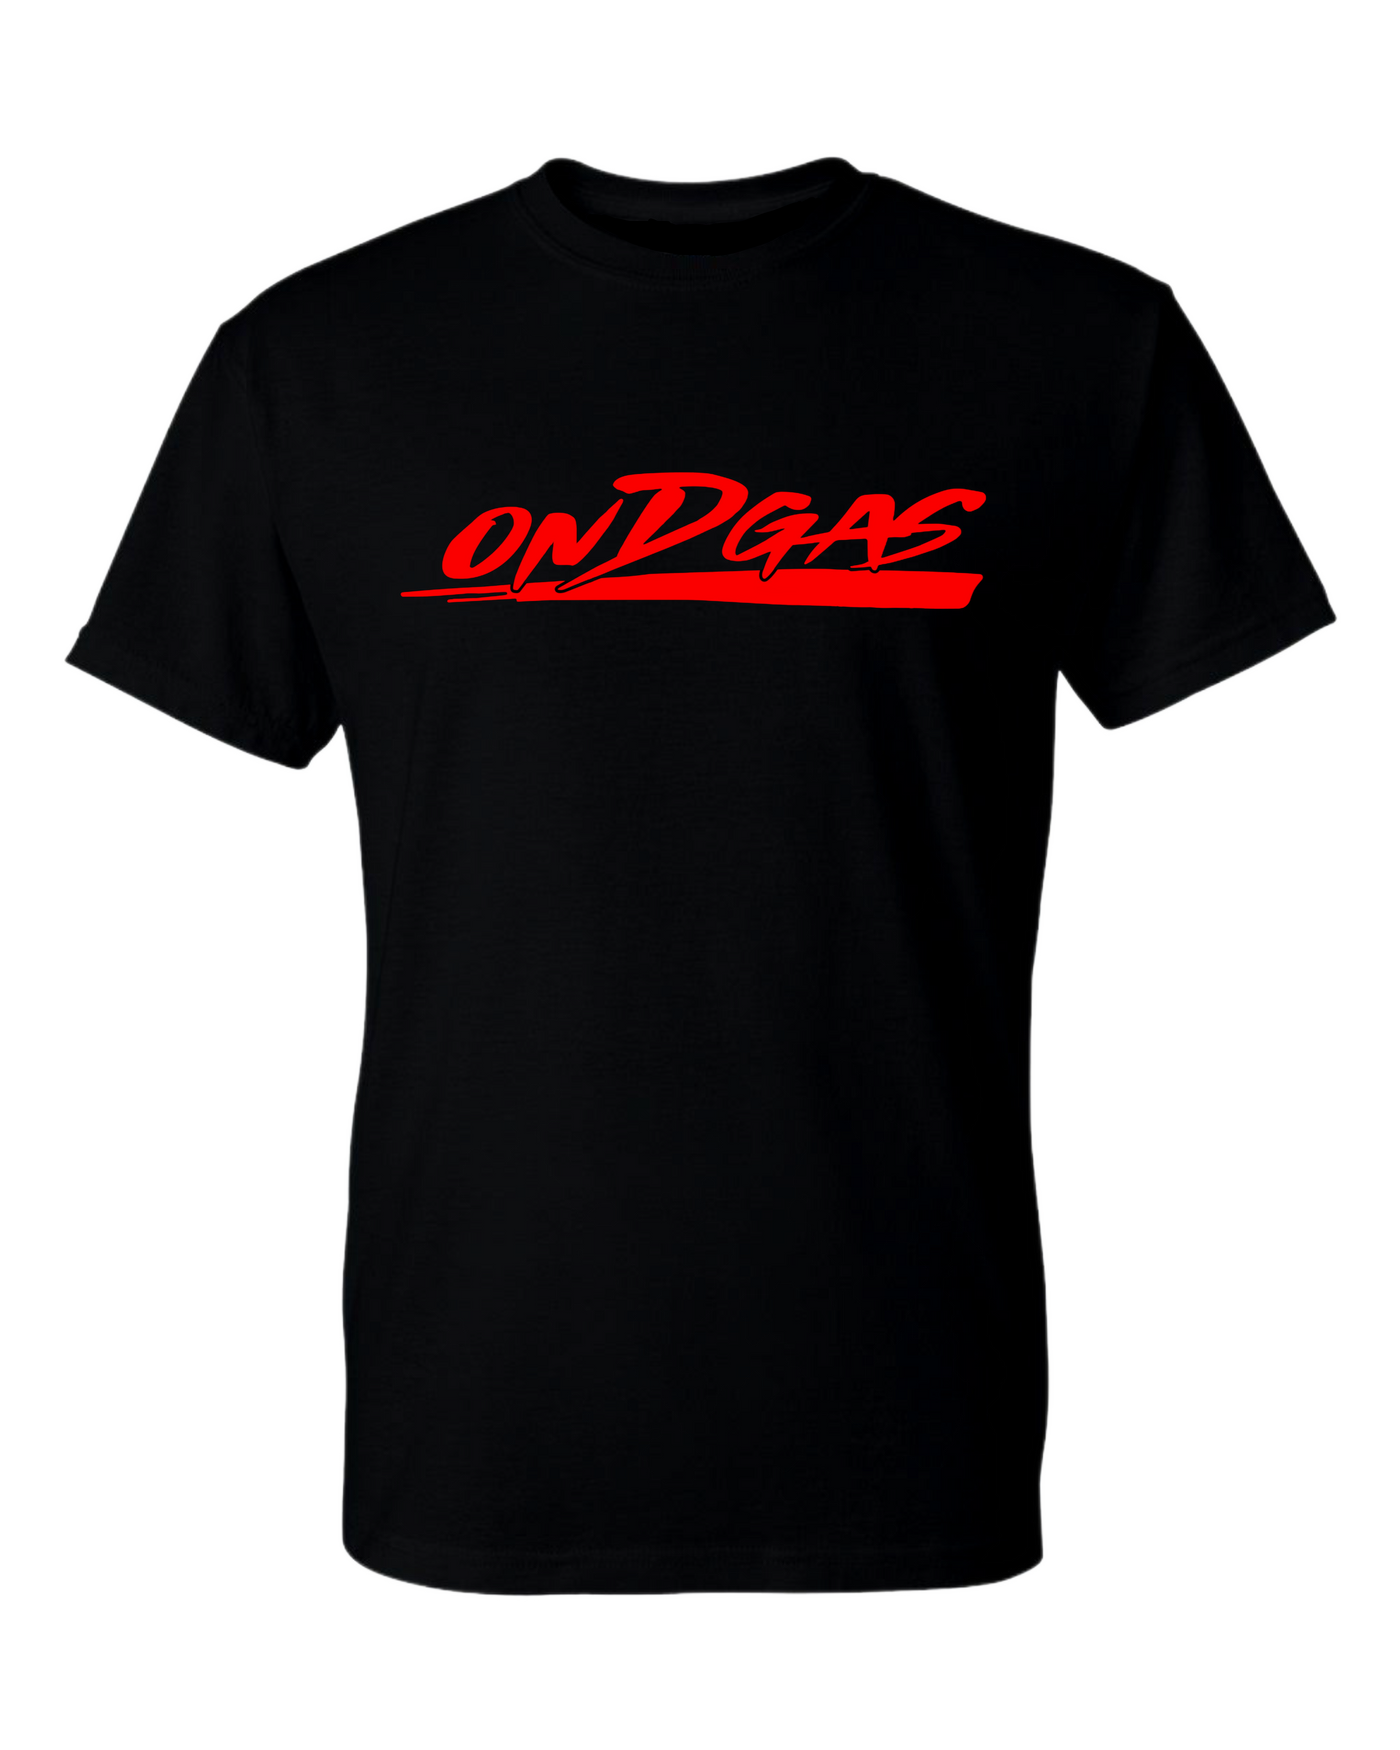 Black shirt with RED Reflective ONDGAS Logo